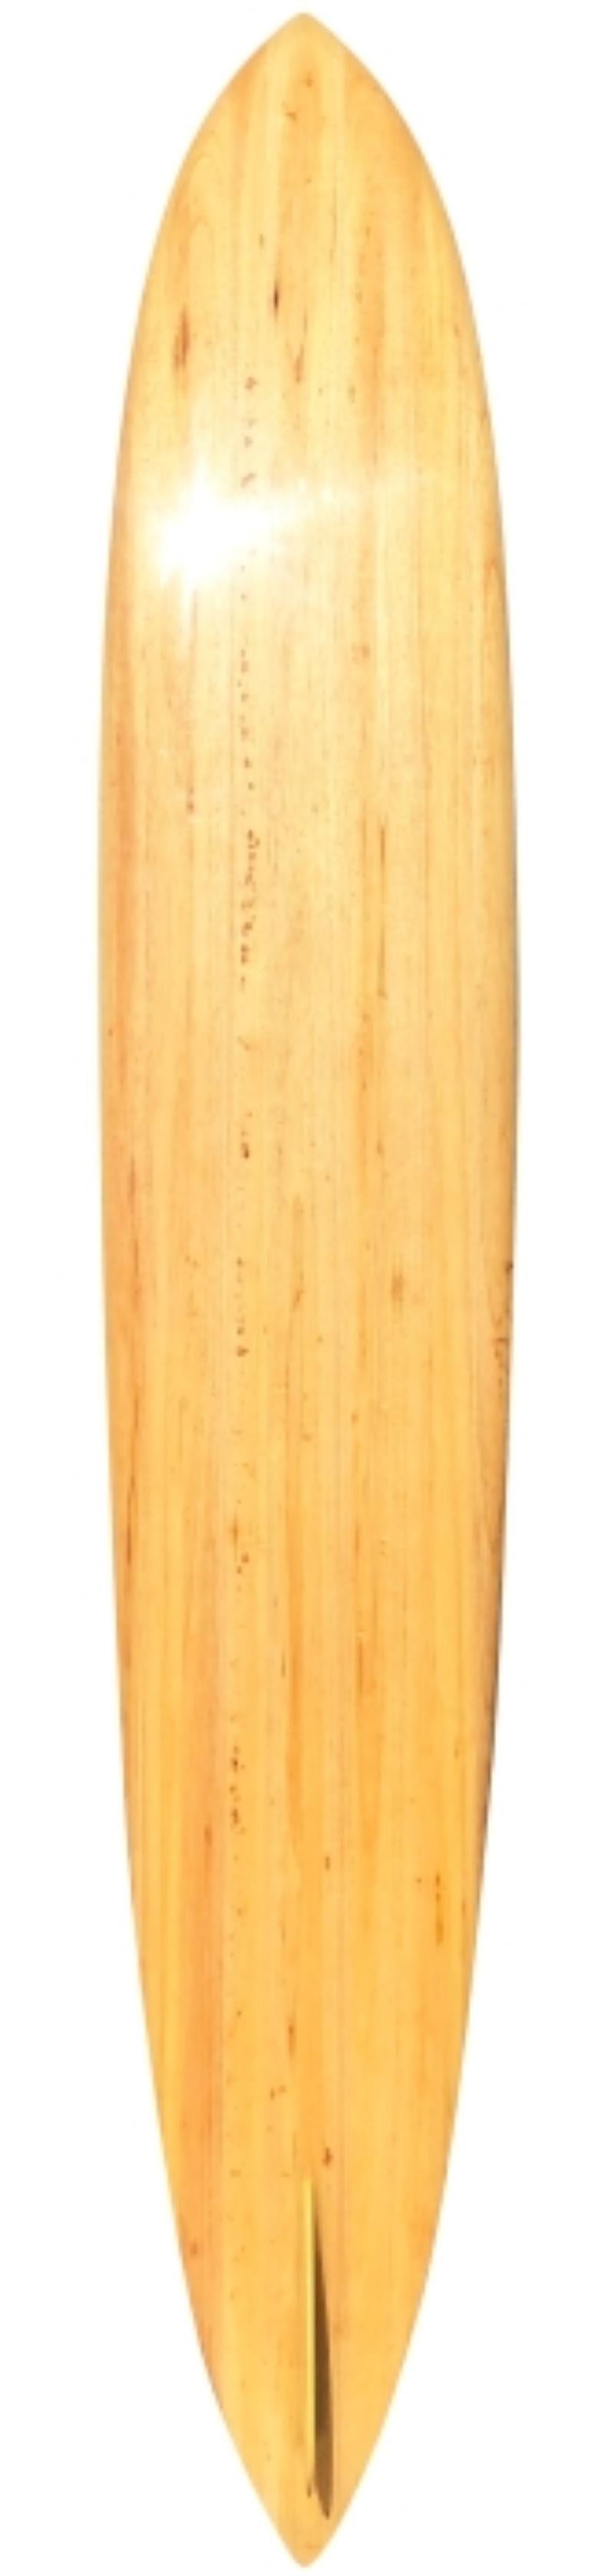 1994 Big wave surfboard made by the legendary Pat Curren. The first surfer to master riding the massive waves of Waimea Bay on the North Shore of Oahu, Hawaii This significant surfboard represents 1 of only 6 boards Curren made in 1994 for fellow